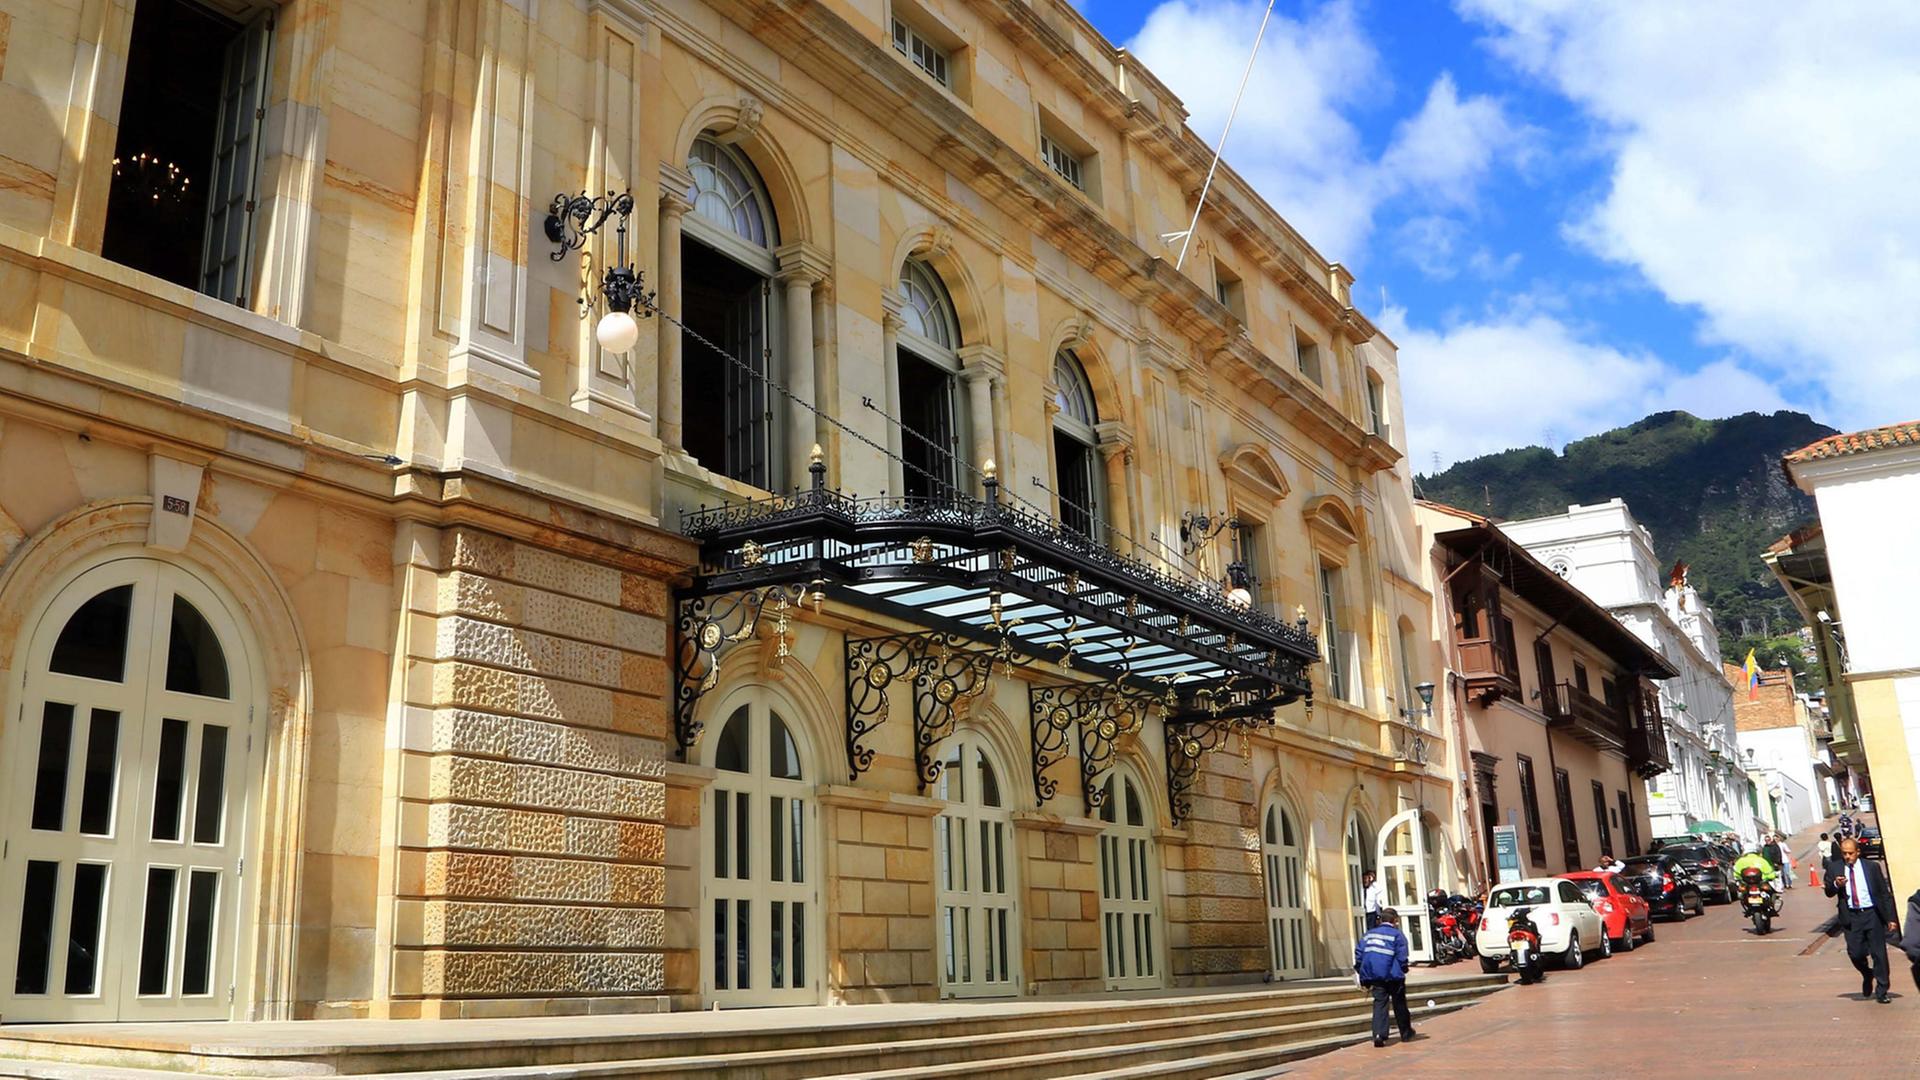 A picture made available on 23 July 2014 shows an exterior view of the Colon Theatre in Bogota, Colombia, 22 July 2014. The theatre, built in the XIX century, reopens its doors on 23 July 2014 after six years of remodeling works.